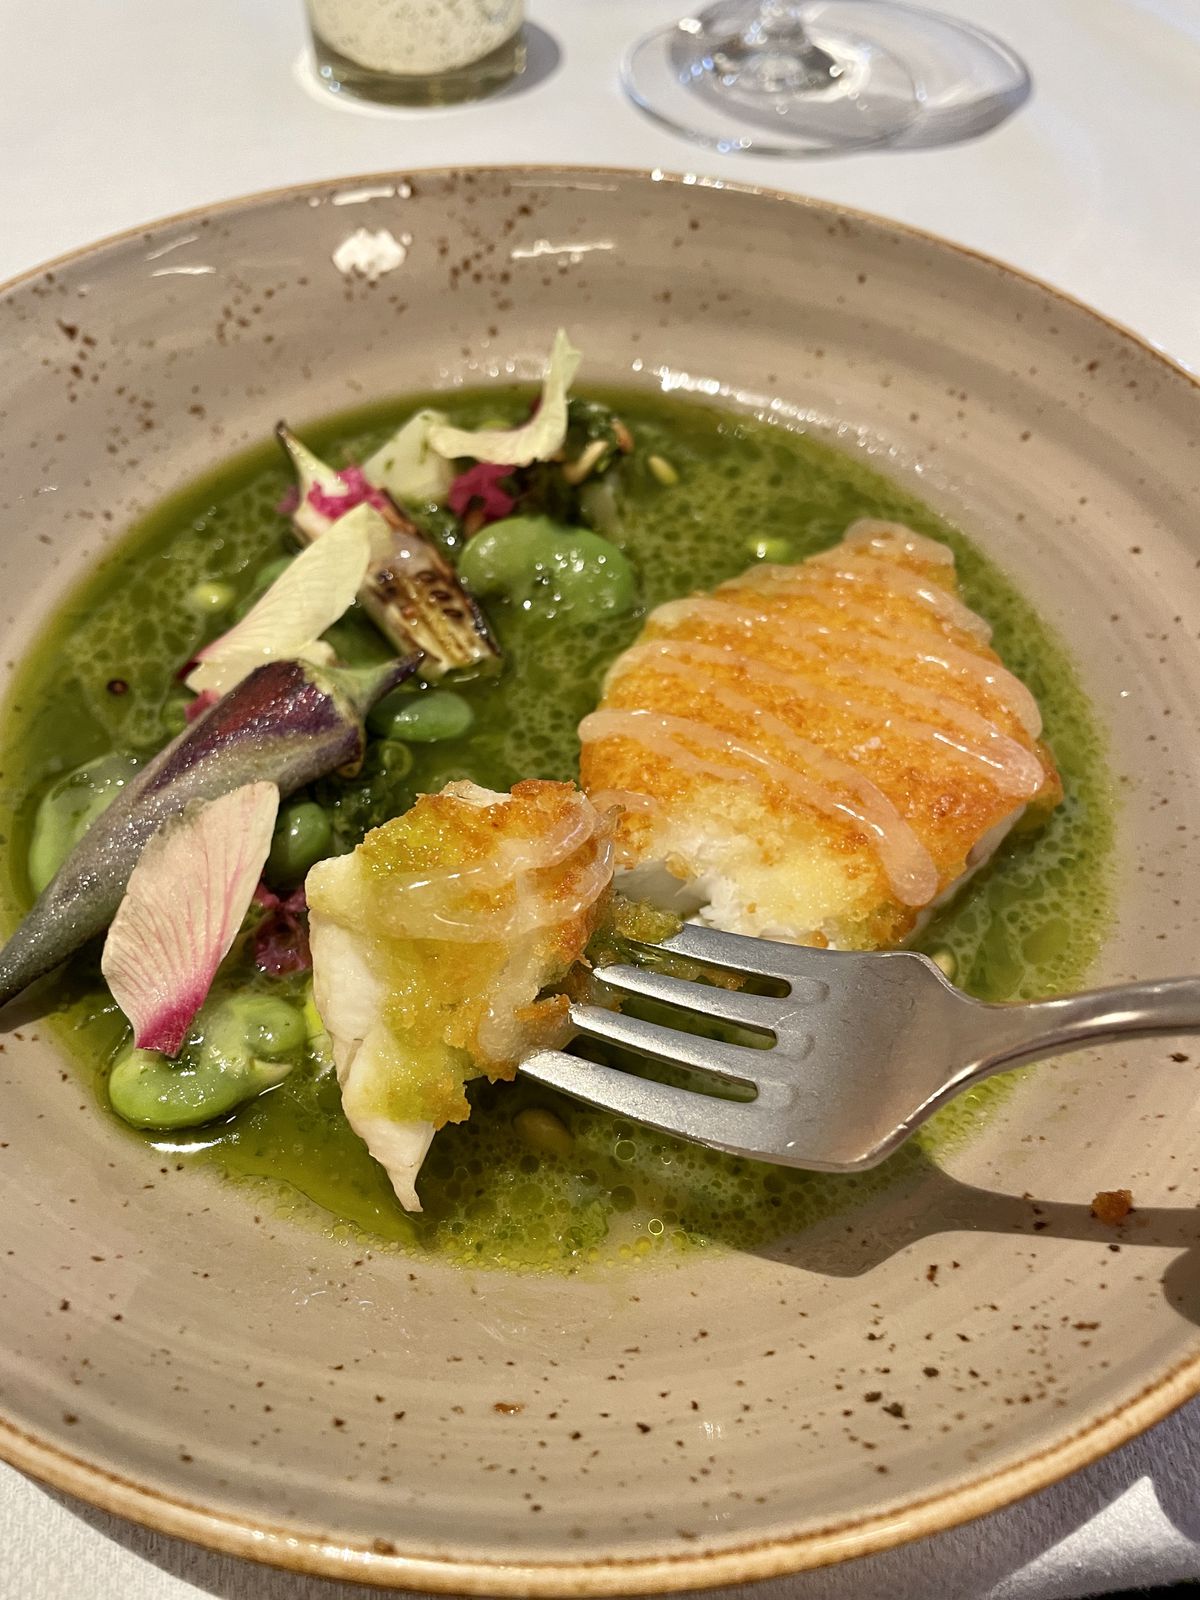 A bowl holds a filet of snapper that has been crusted and sits in an arugula sauce. There are also oversized lima beans and radishes in the dish. A fork holds a bite.